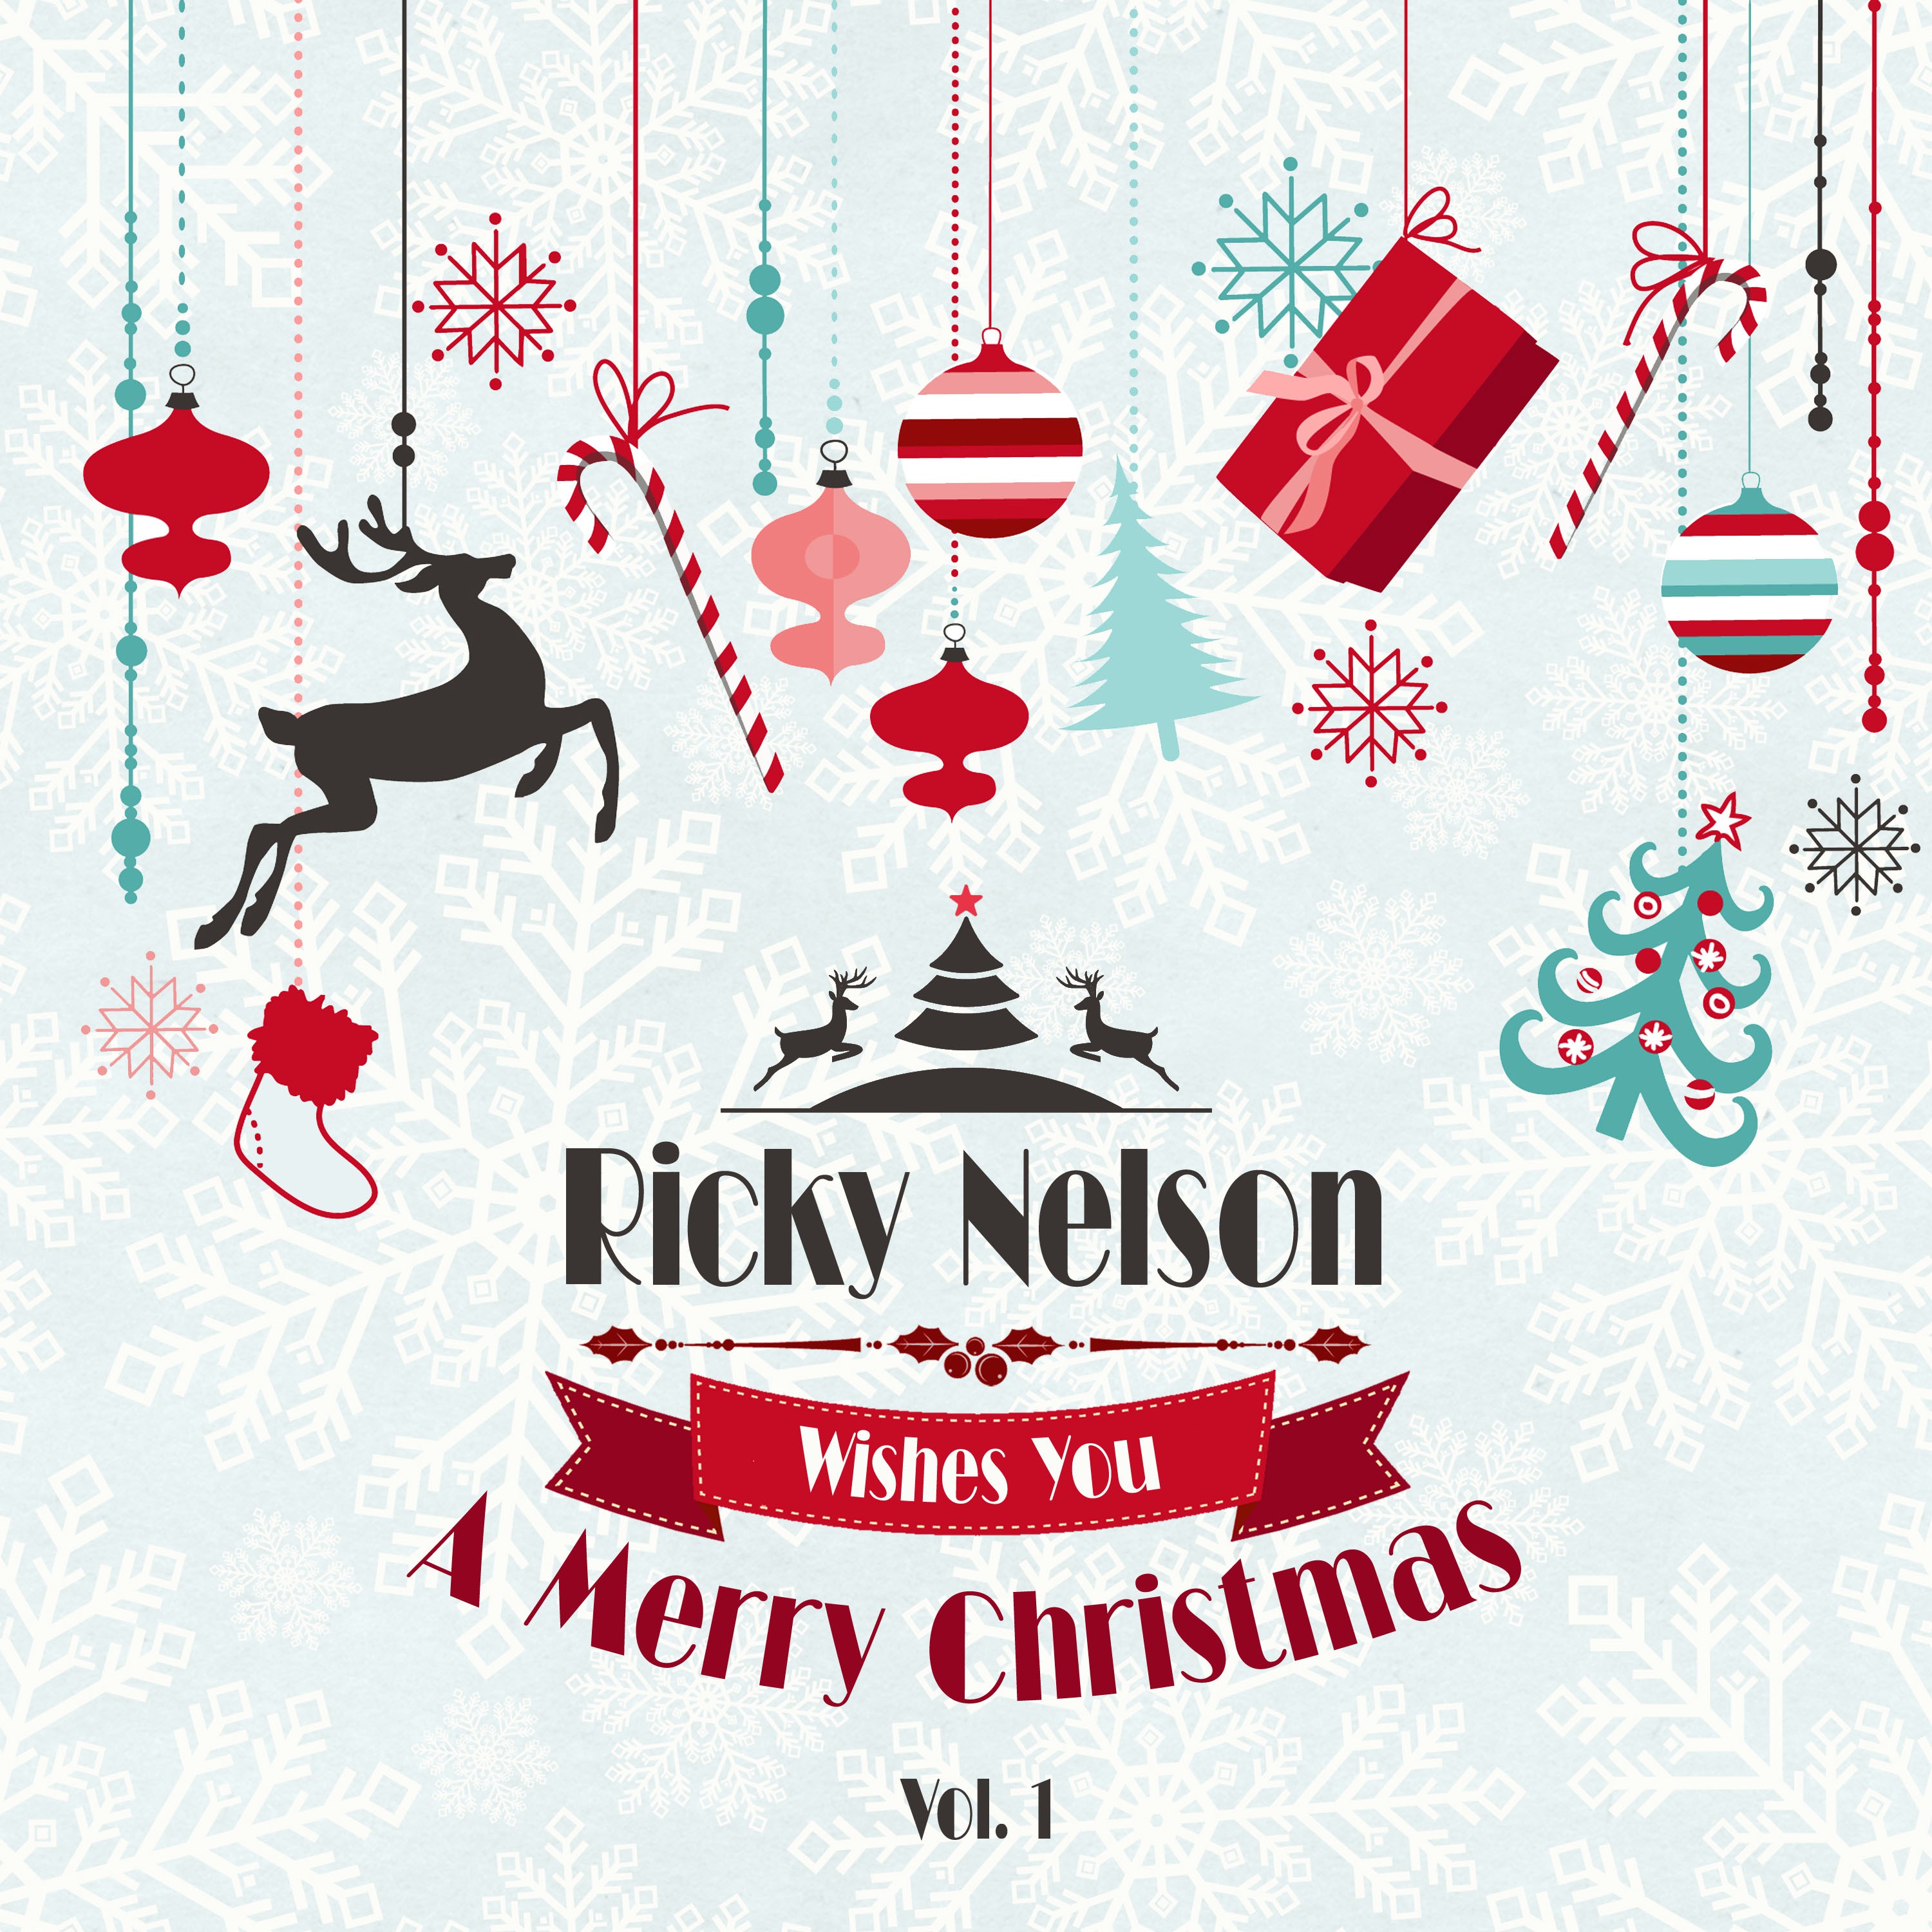 Ricky Nelson Wishes You a Merry Christmas, Vol. 1